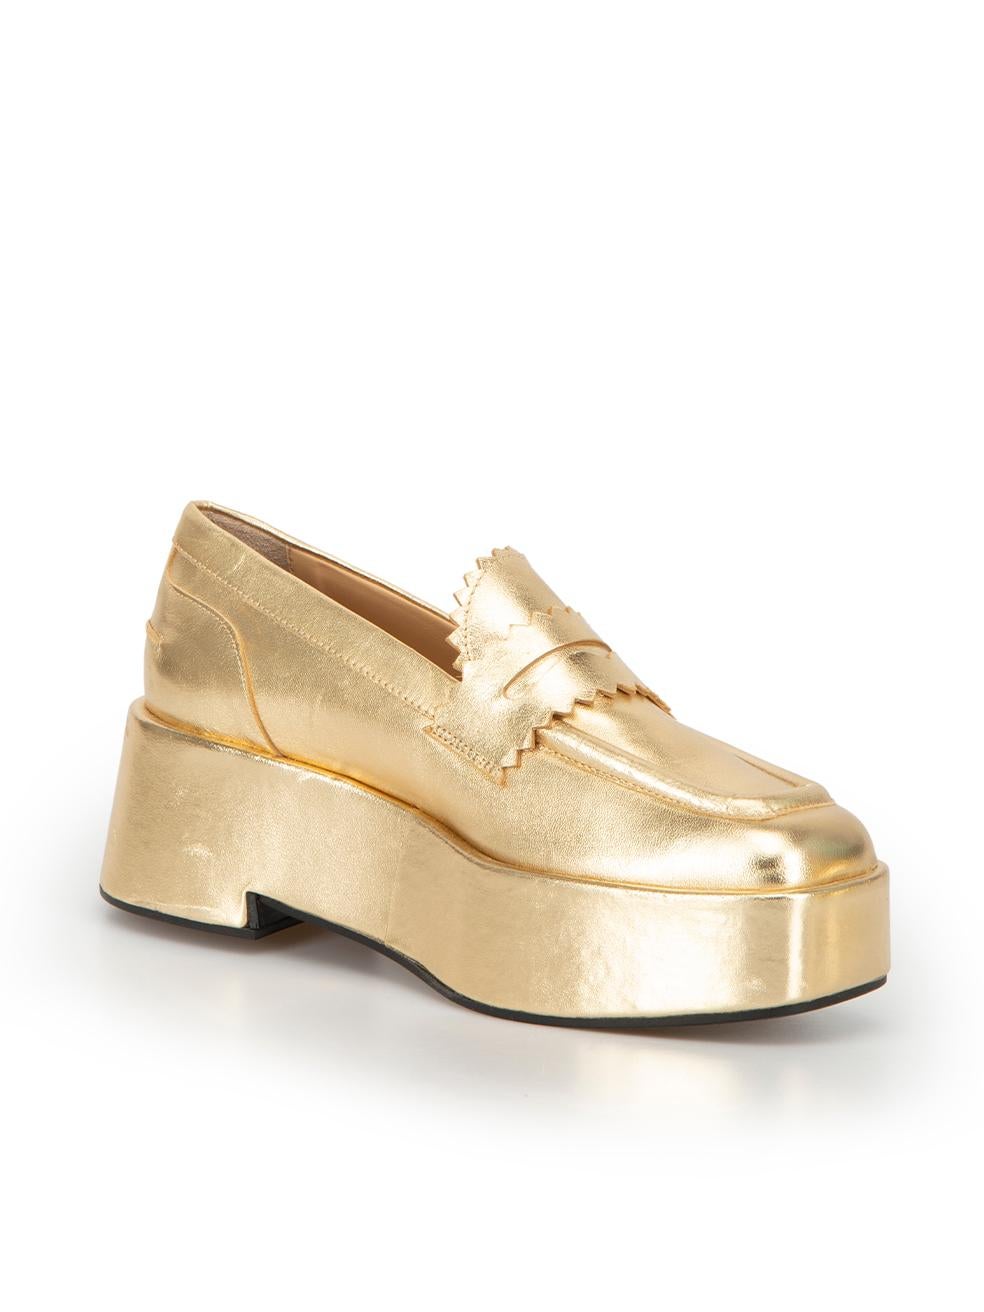 CONDITION is Very good. Minimal wear to loafers is evident. Minimal wear to the leather exterior which is scuffed and has scratches on this used Tara Jarmon designer resale item.



Details


Gold

Leather

Metallic

Platform

Square-toe

Slip